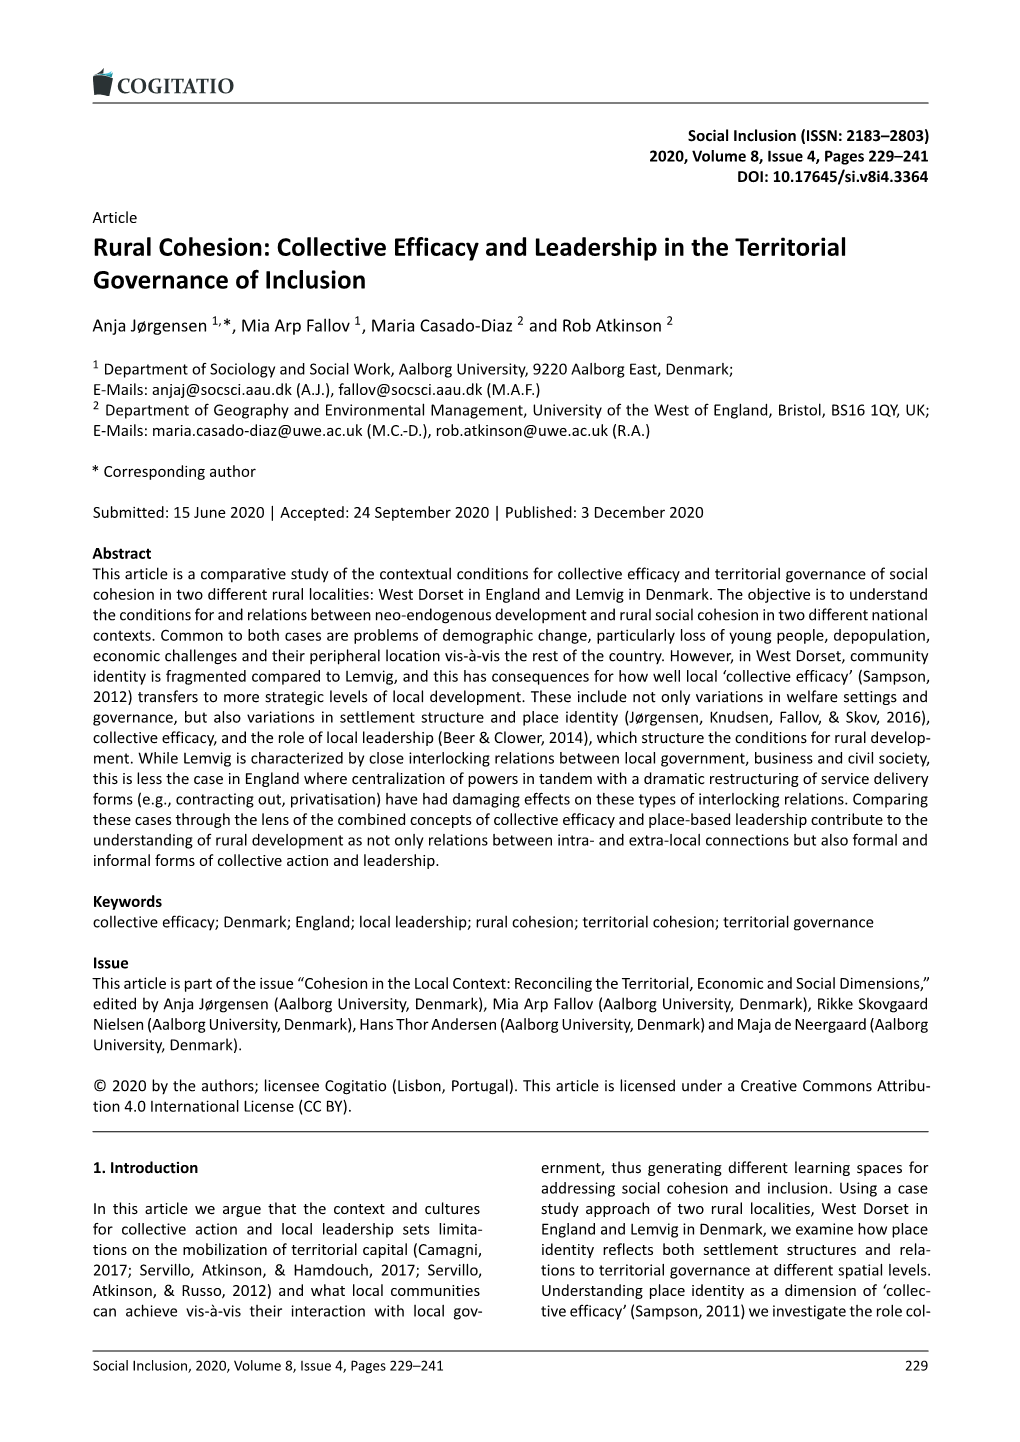 Collective Efficacy and Leadership in the Territorial Governance of Inclusion